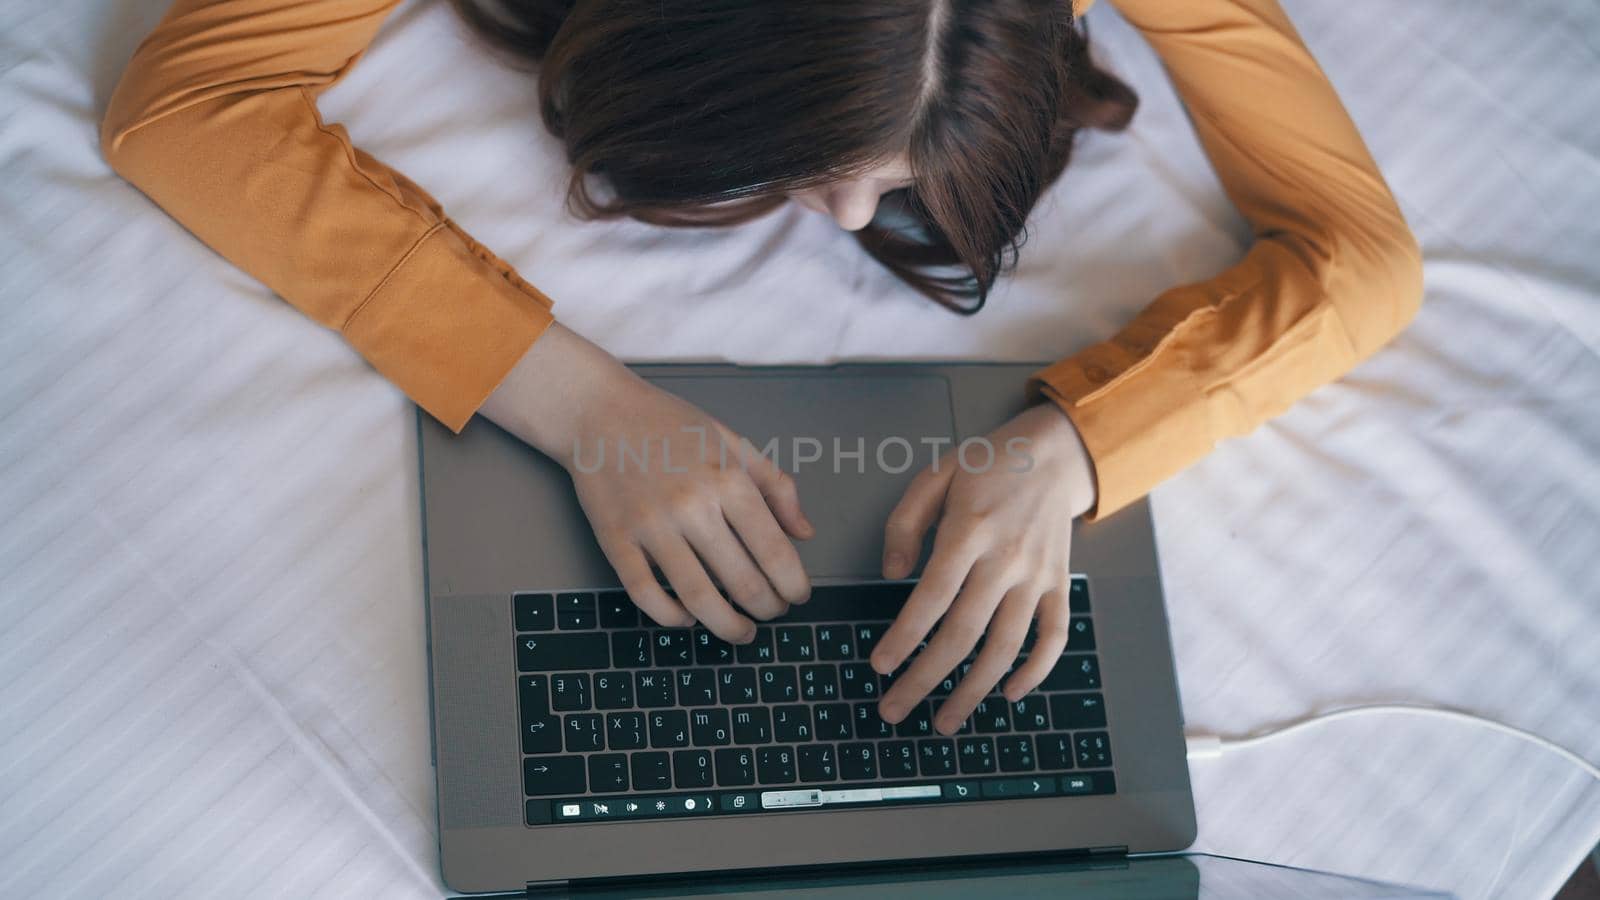 female hands typing text on laptop keyboard close-up. High quality photo